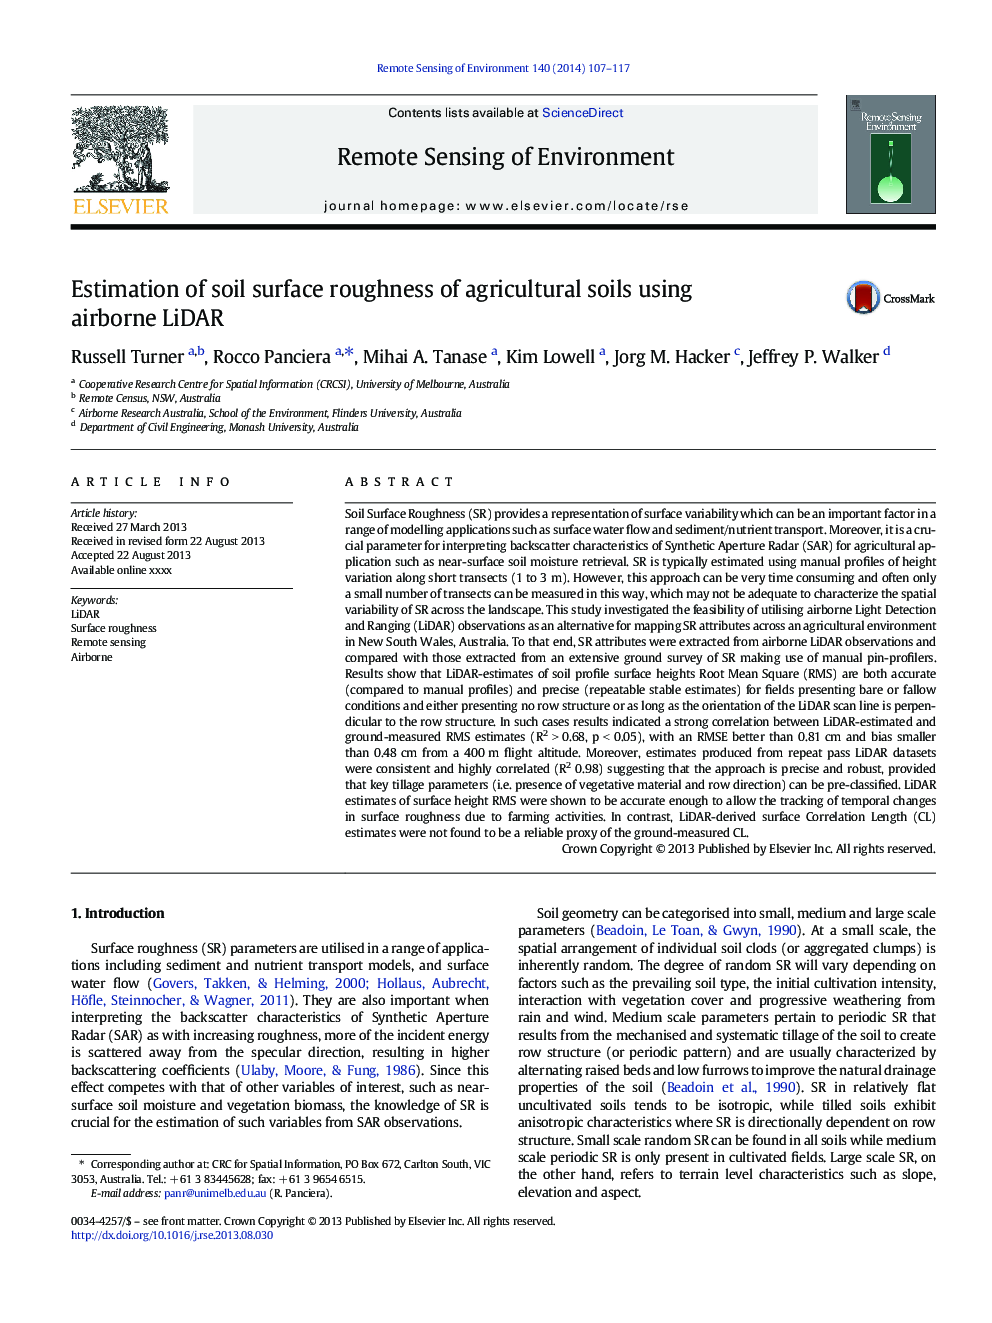 Estimation of soil surface roughness of agricultural soils using airborne LiDAR